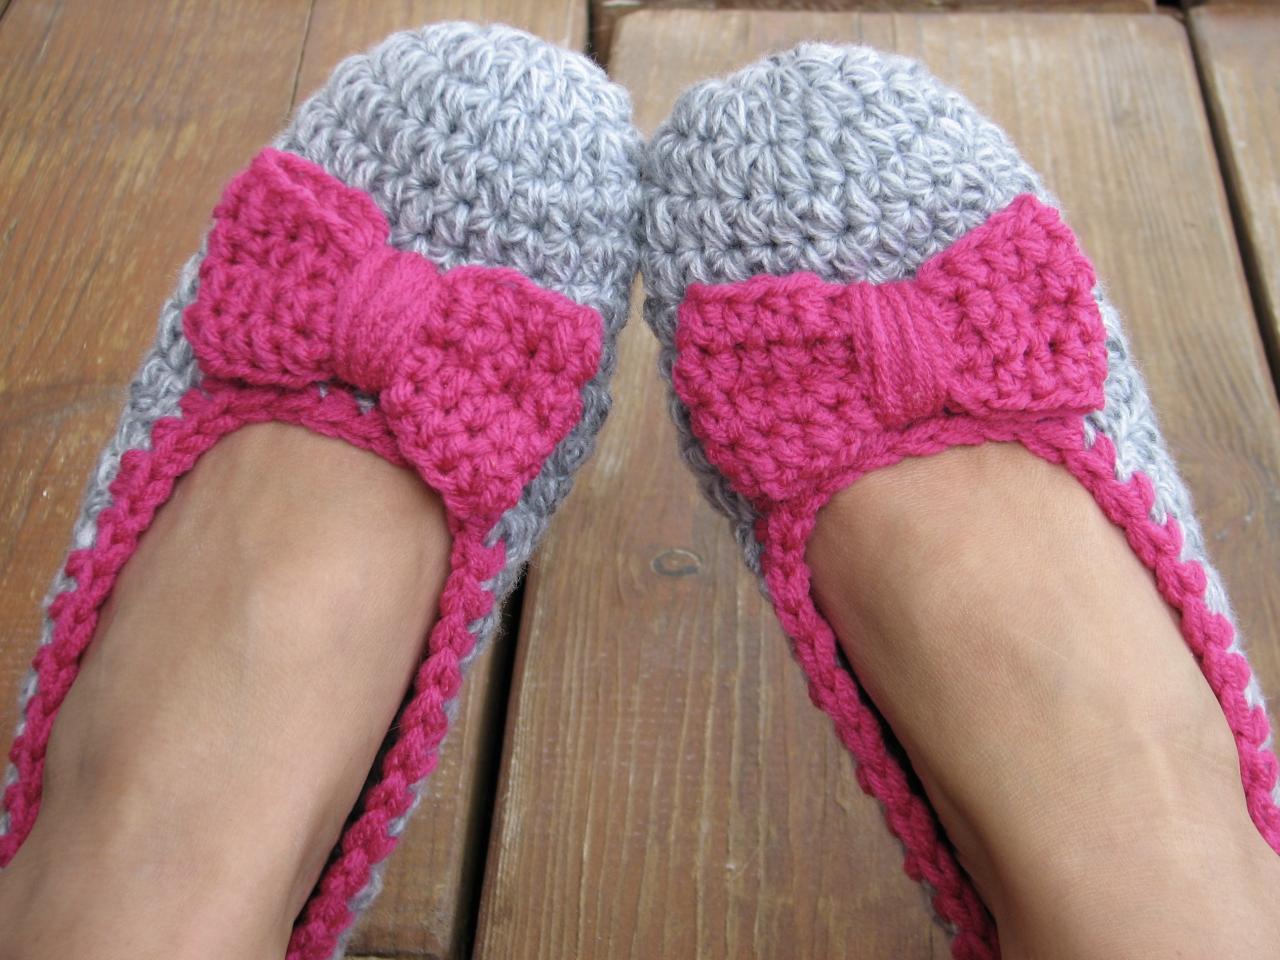 Crochet Women Slippers With Pink Bow, Accessories, Adult Crochet Slippers, Home Shoes, Crochet Women Slippers